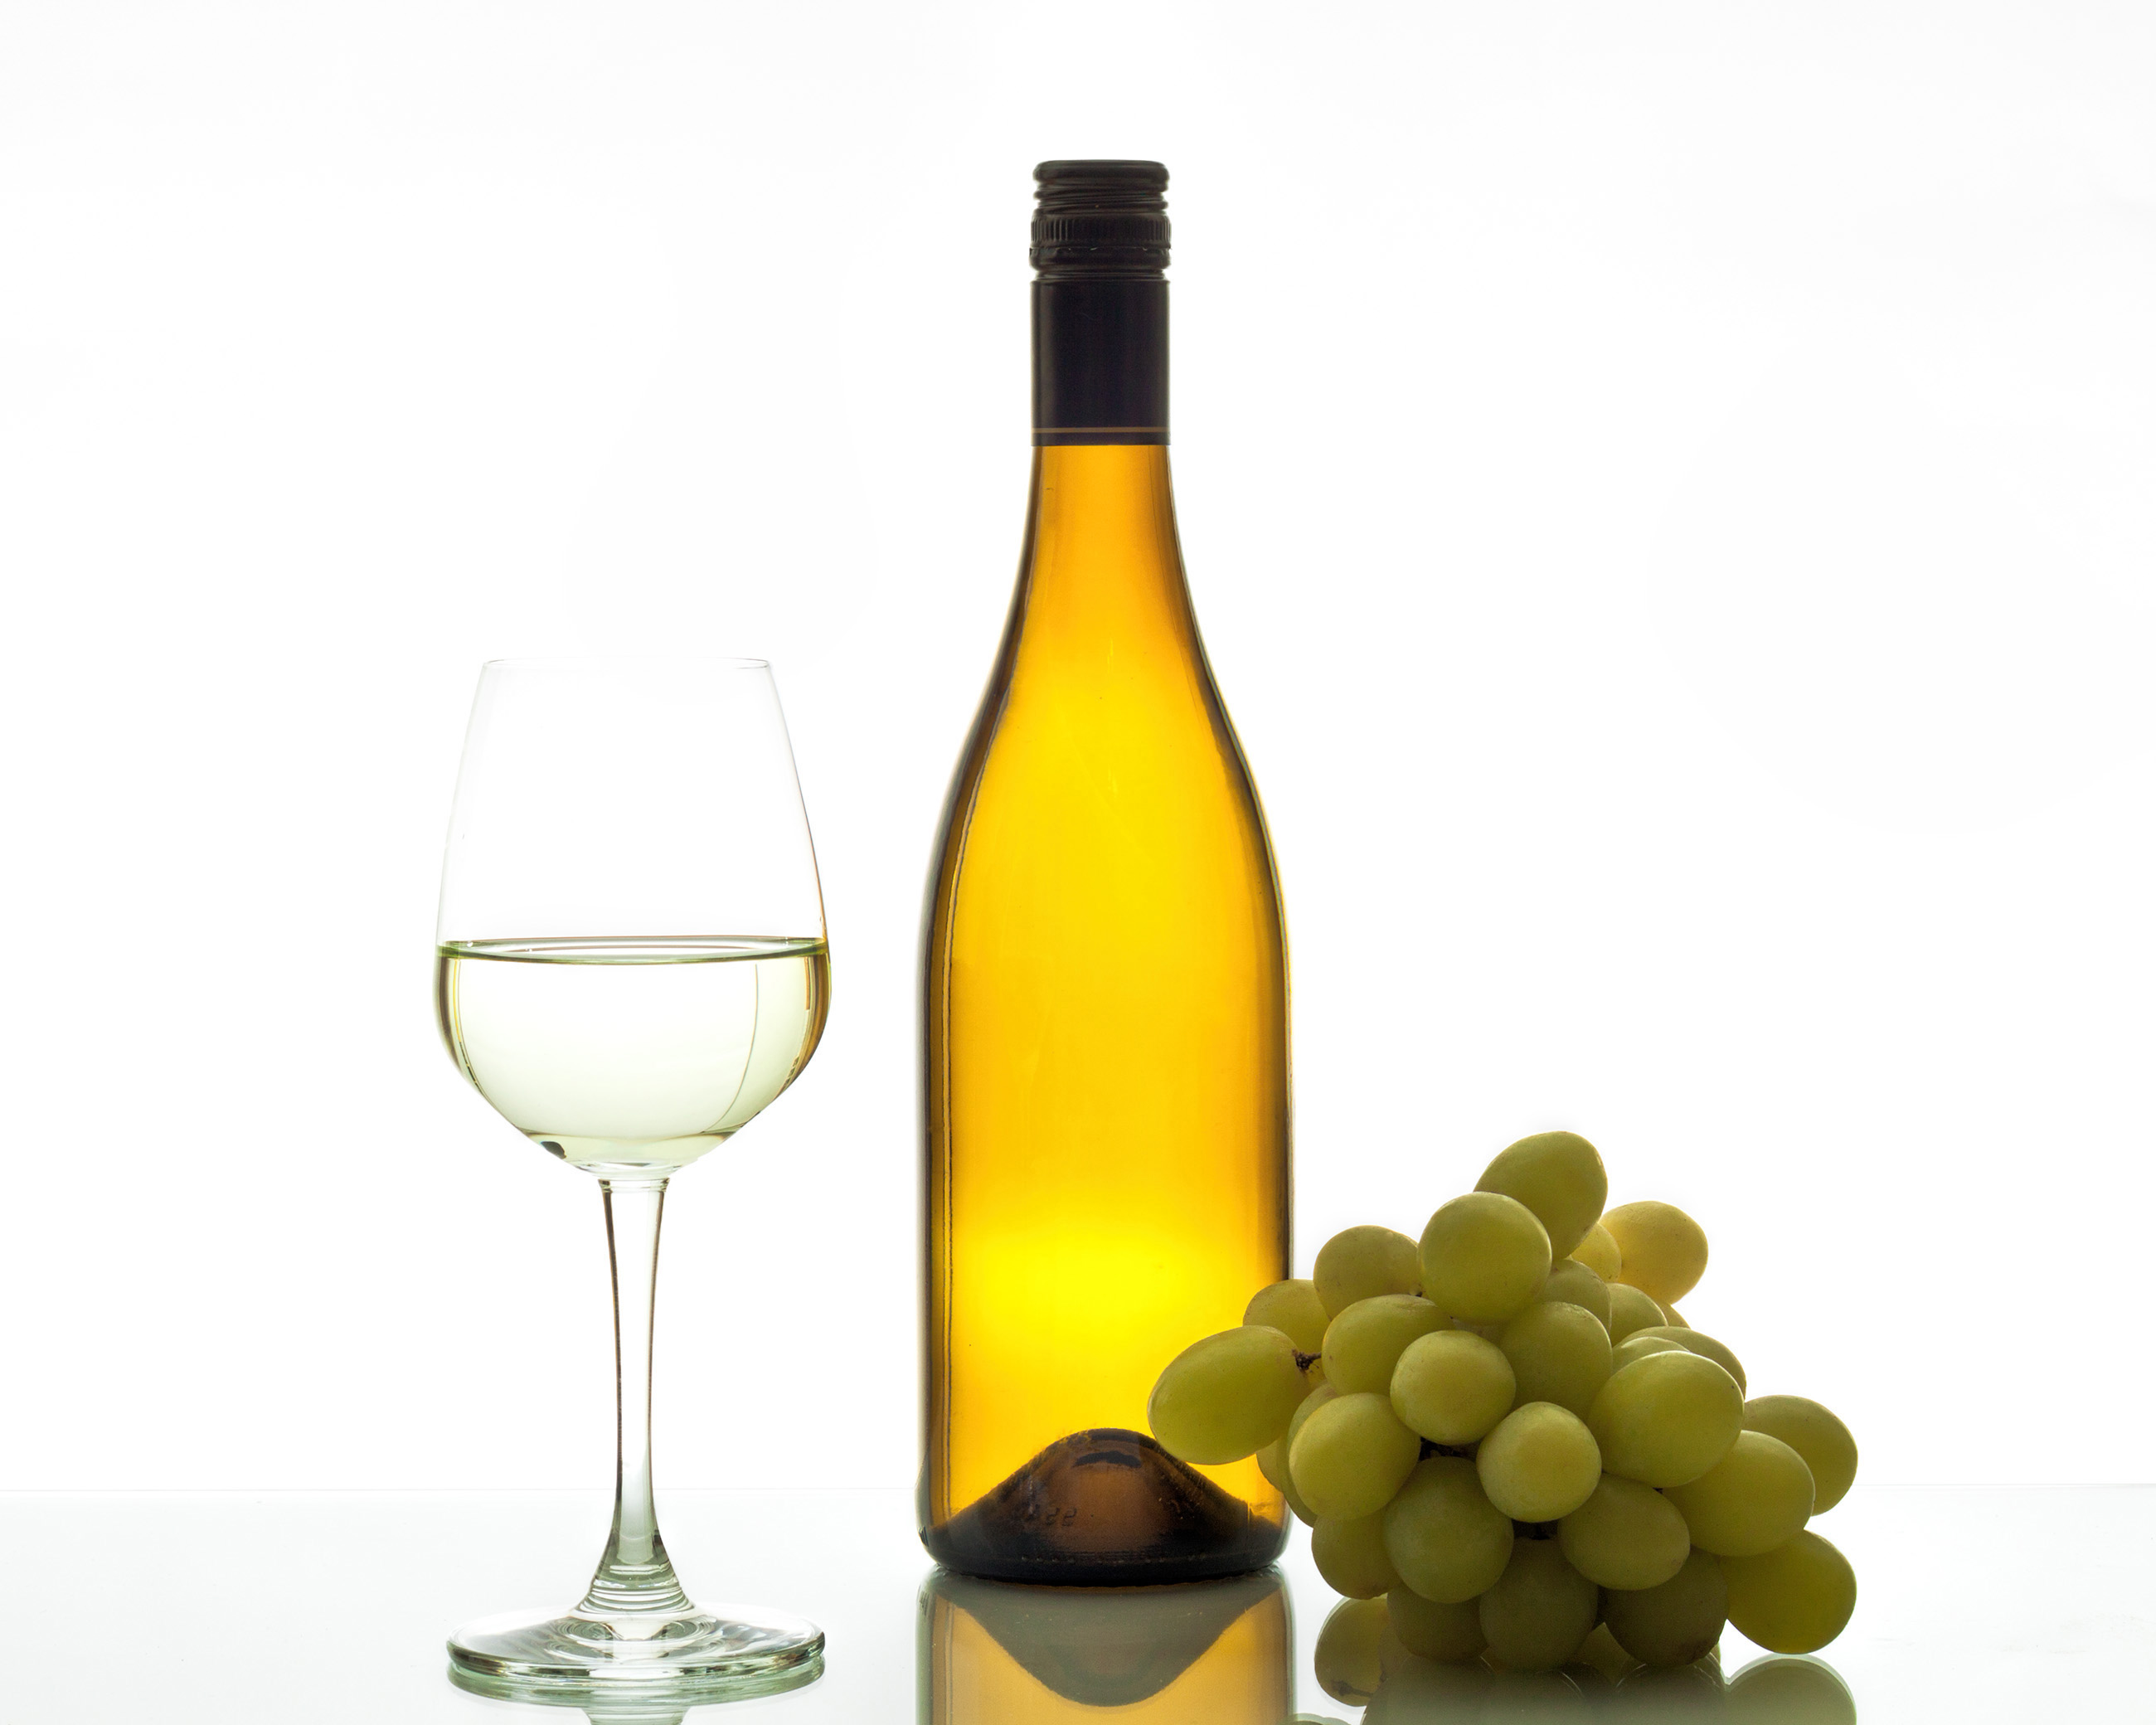 Wine with glass bottle and grapes photo